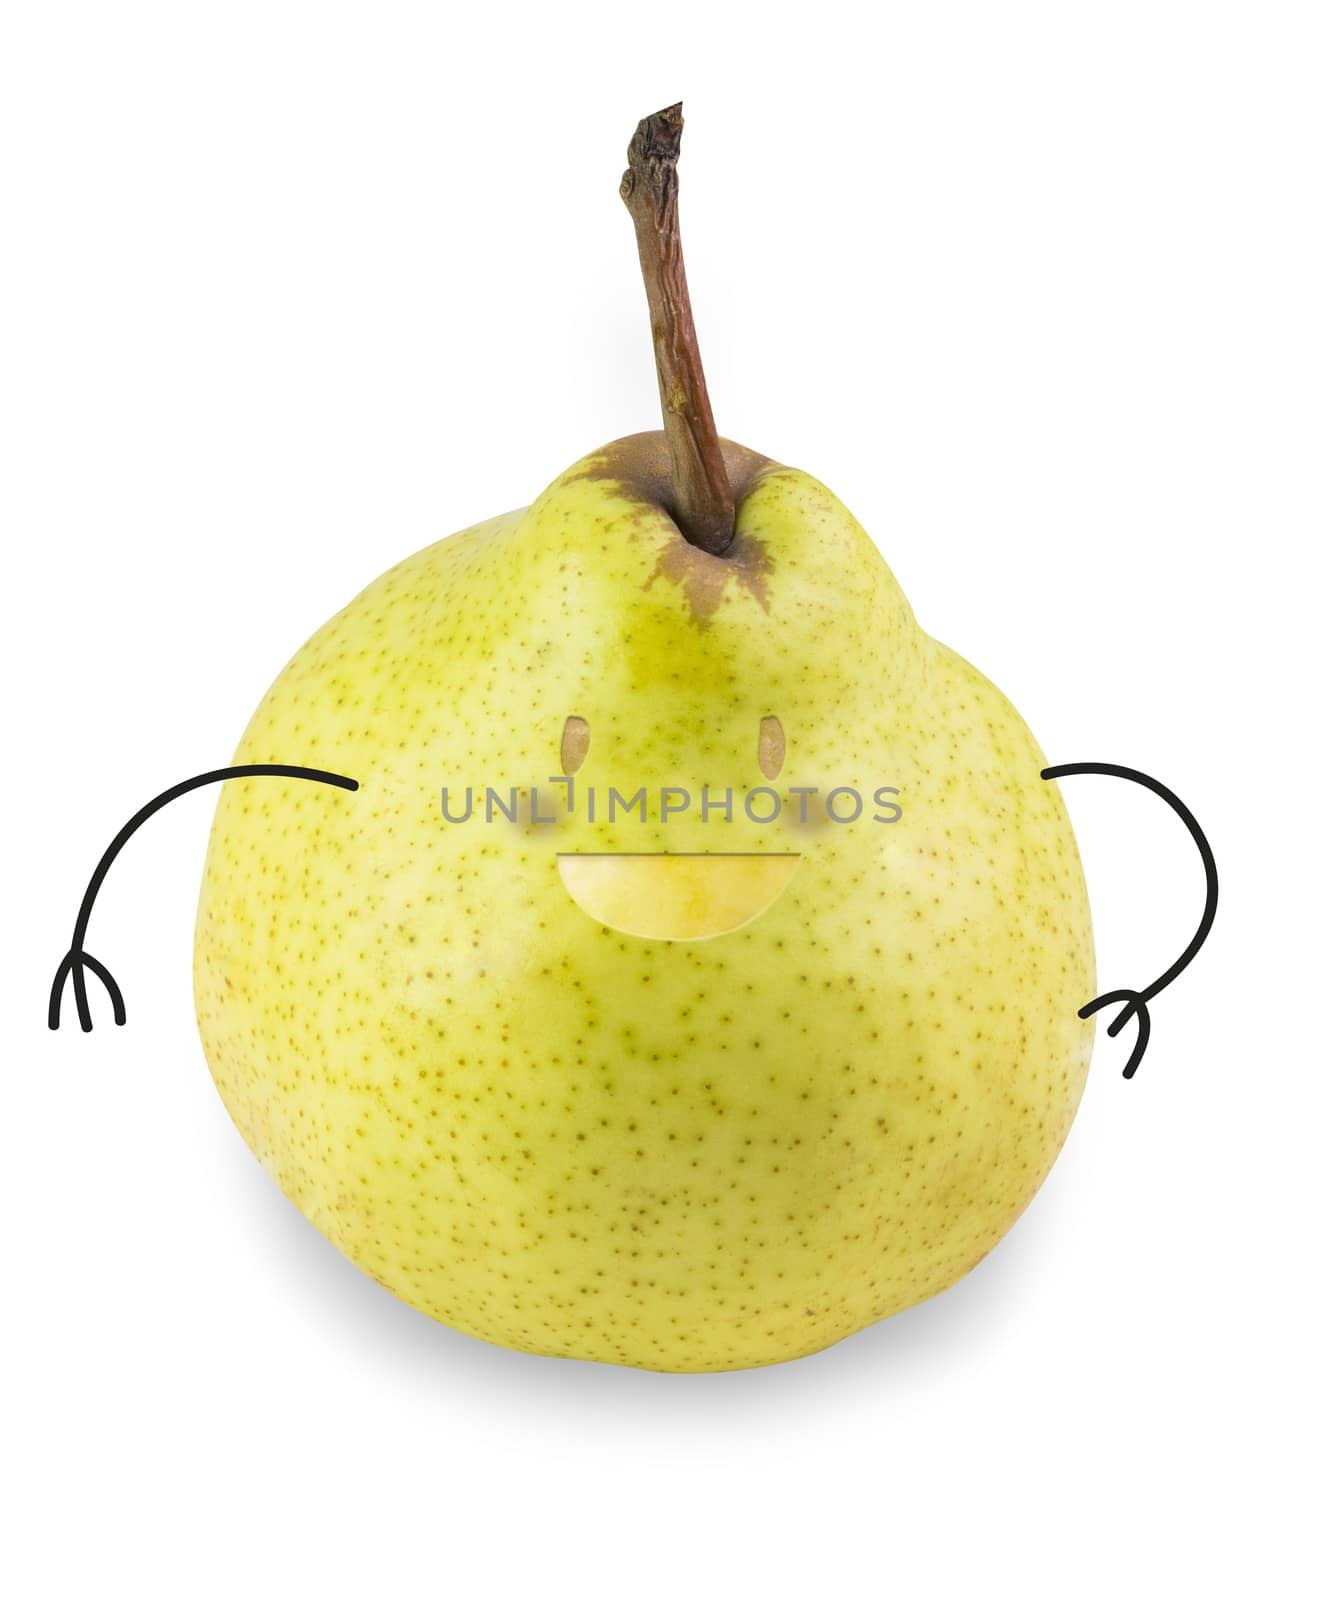 Illustration/photography of a cute smiling character pear.